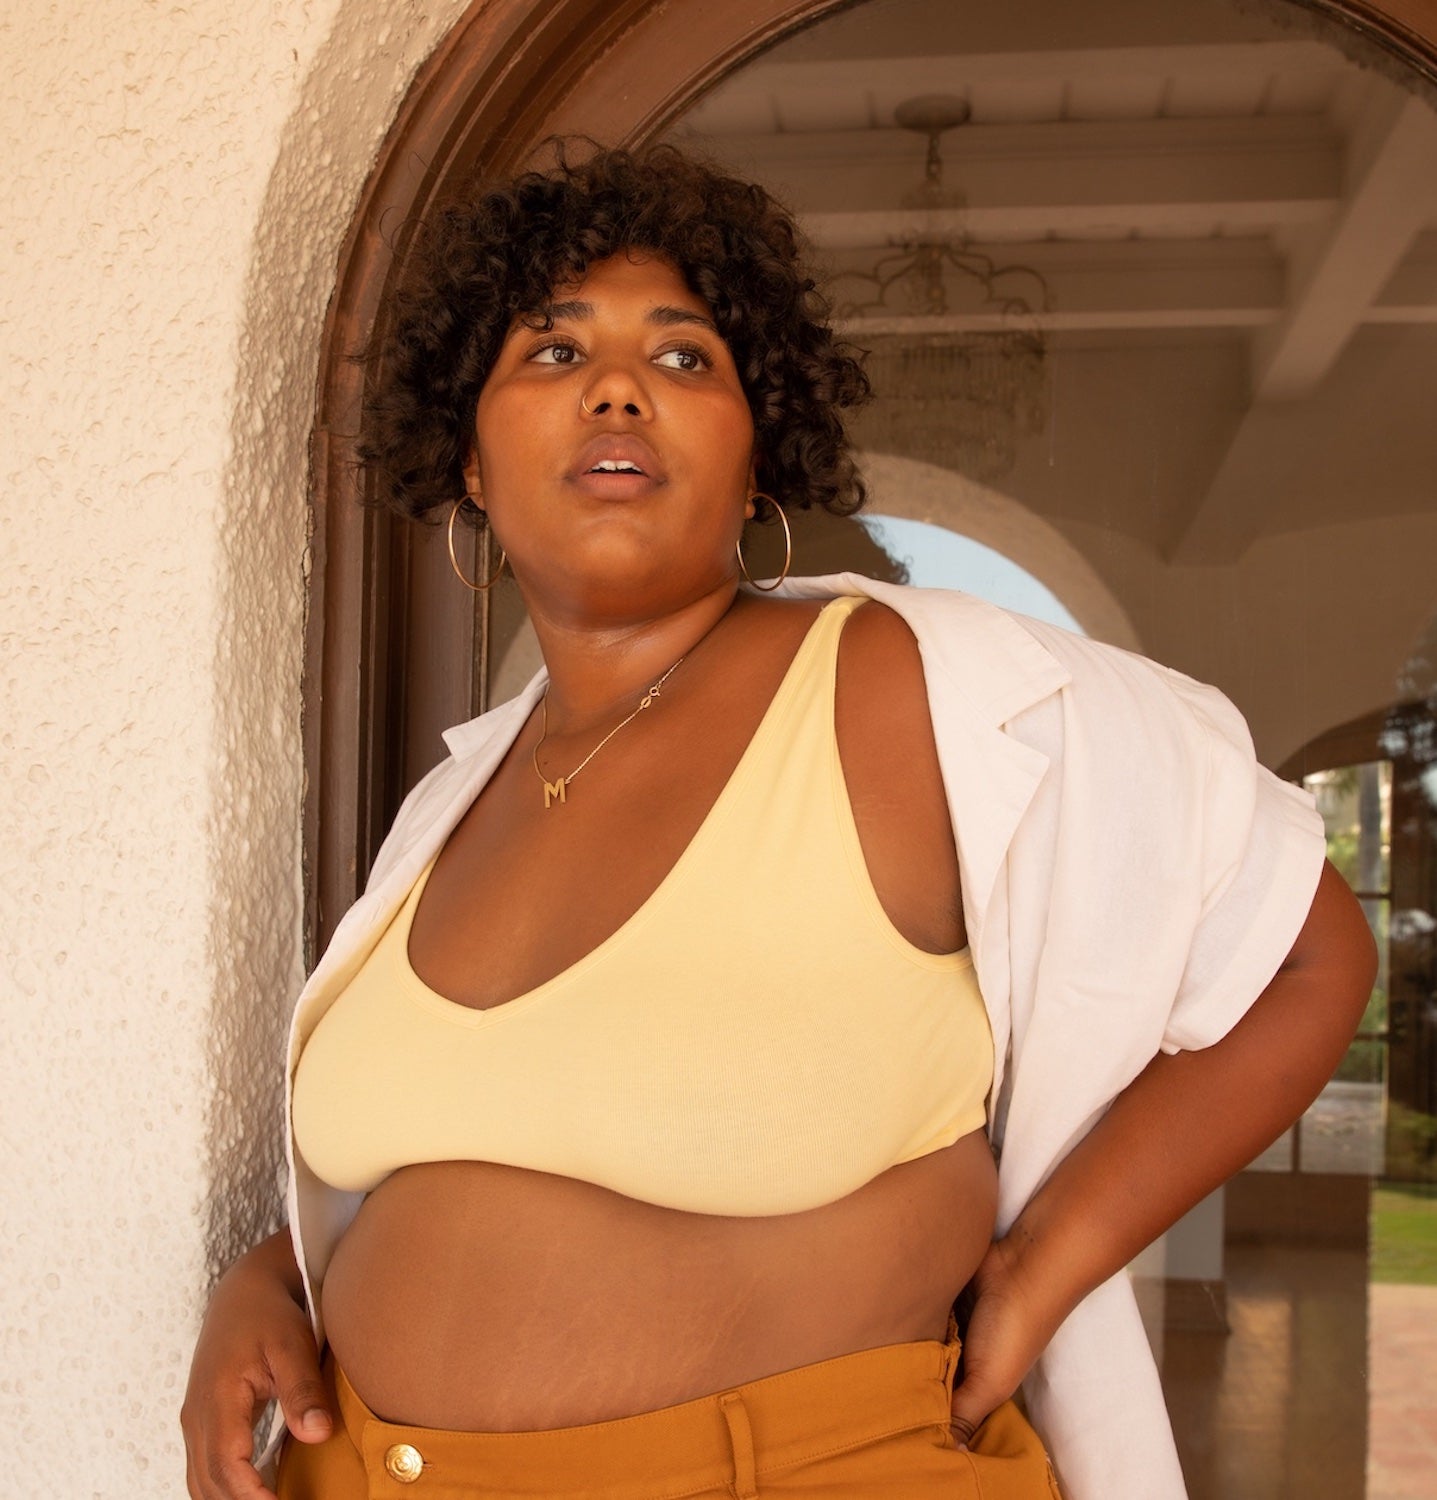 Morgan is wearing Pantry Button-Up in Vintage Off-White, Bralette in Butter Yellow, and Western Pants in Spicy Mustard